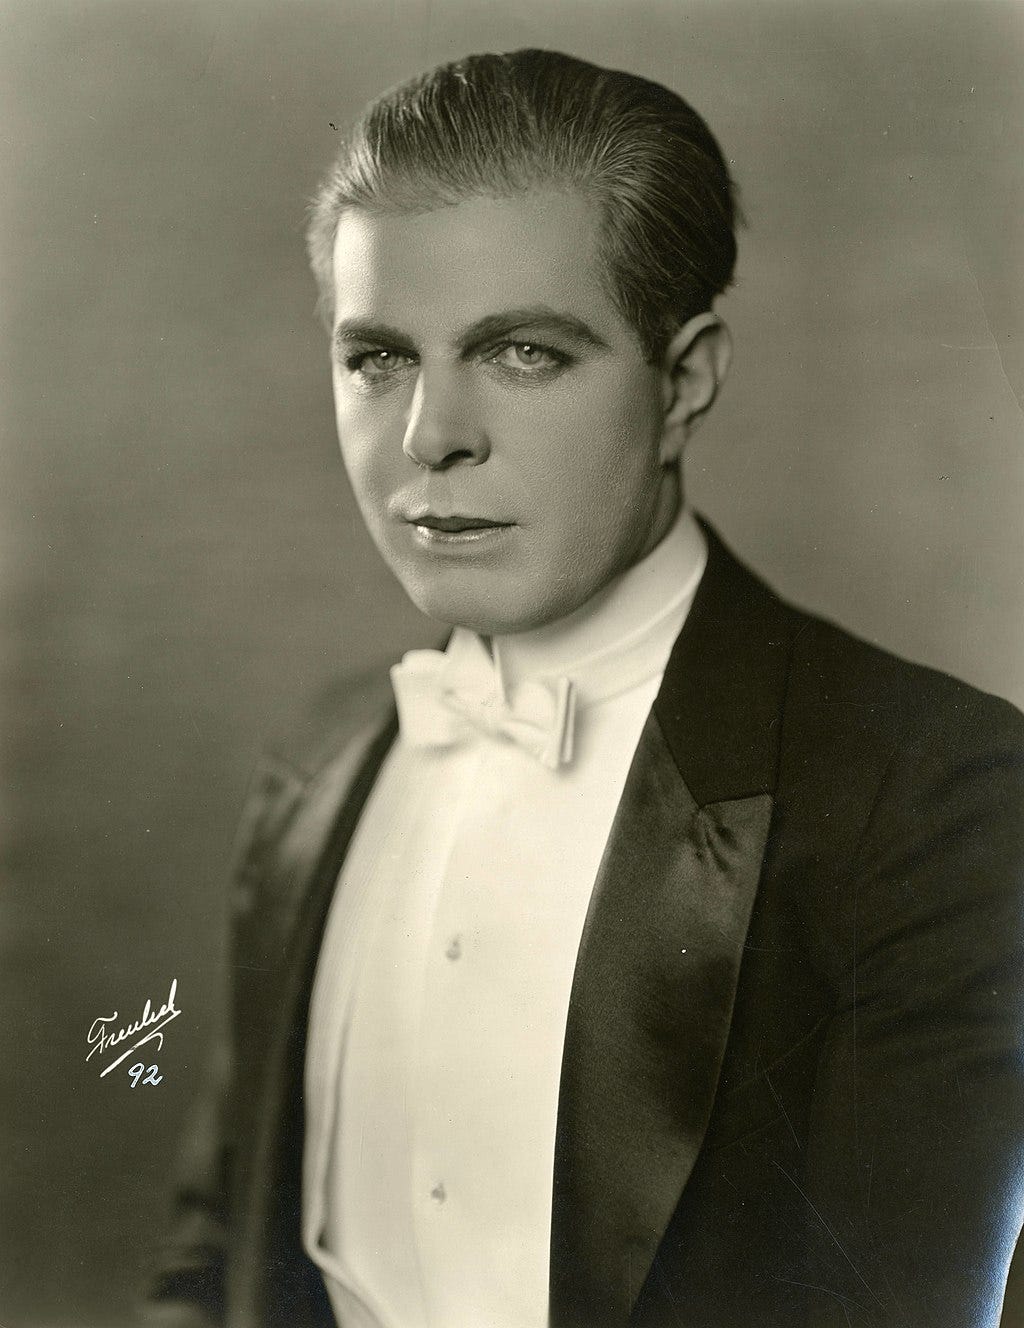 Black and white portrait photograph of Hoot Gibson in about 1922.